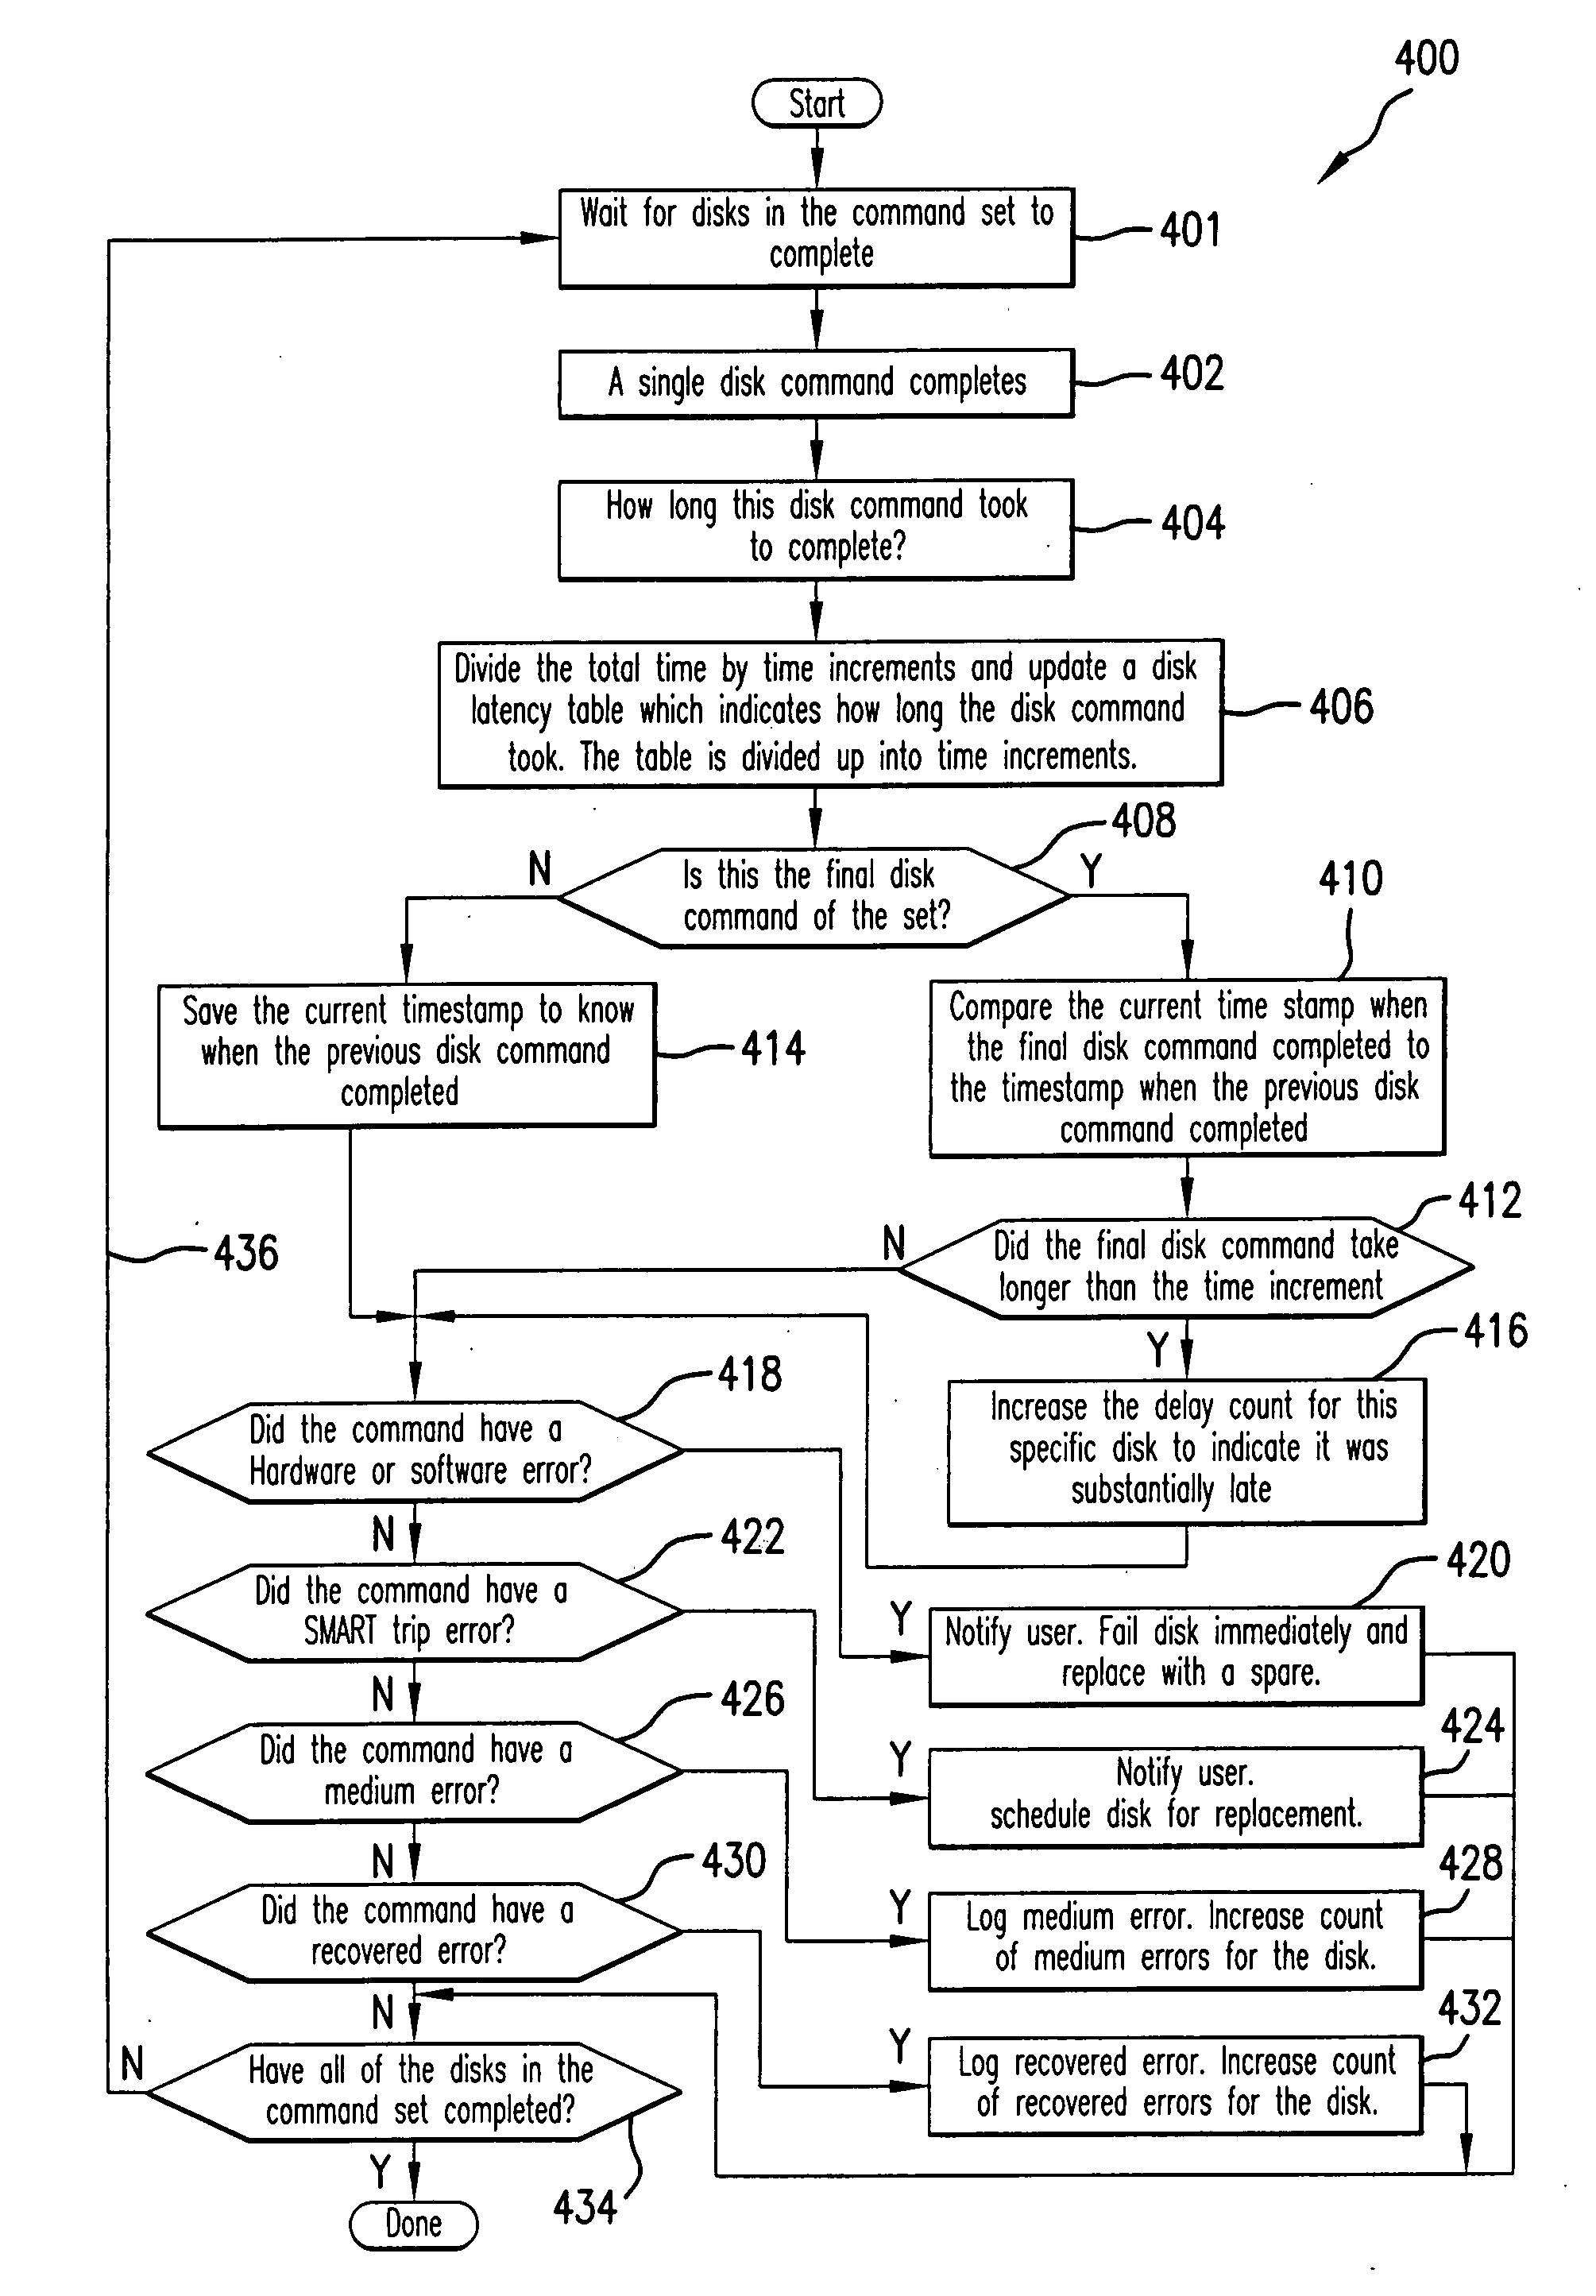 Method for detecting problematic disk drives and disk channels in a RAID memory system based on command processing latency